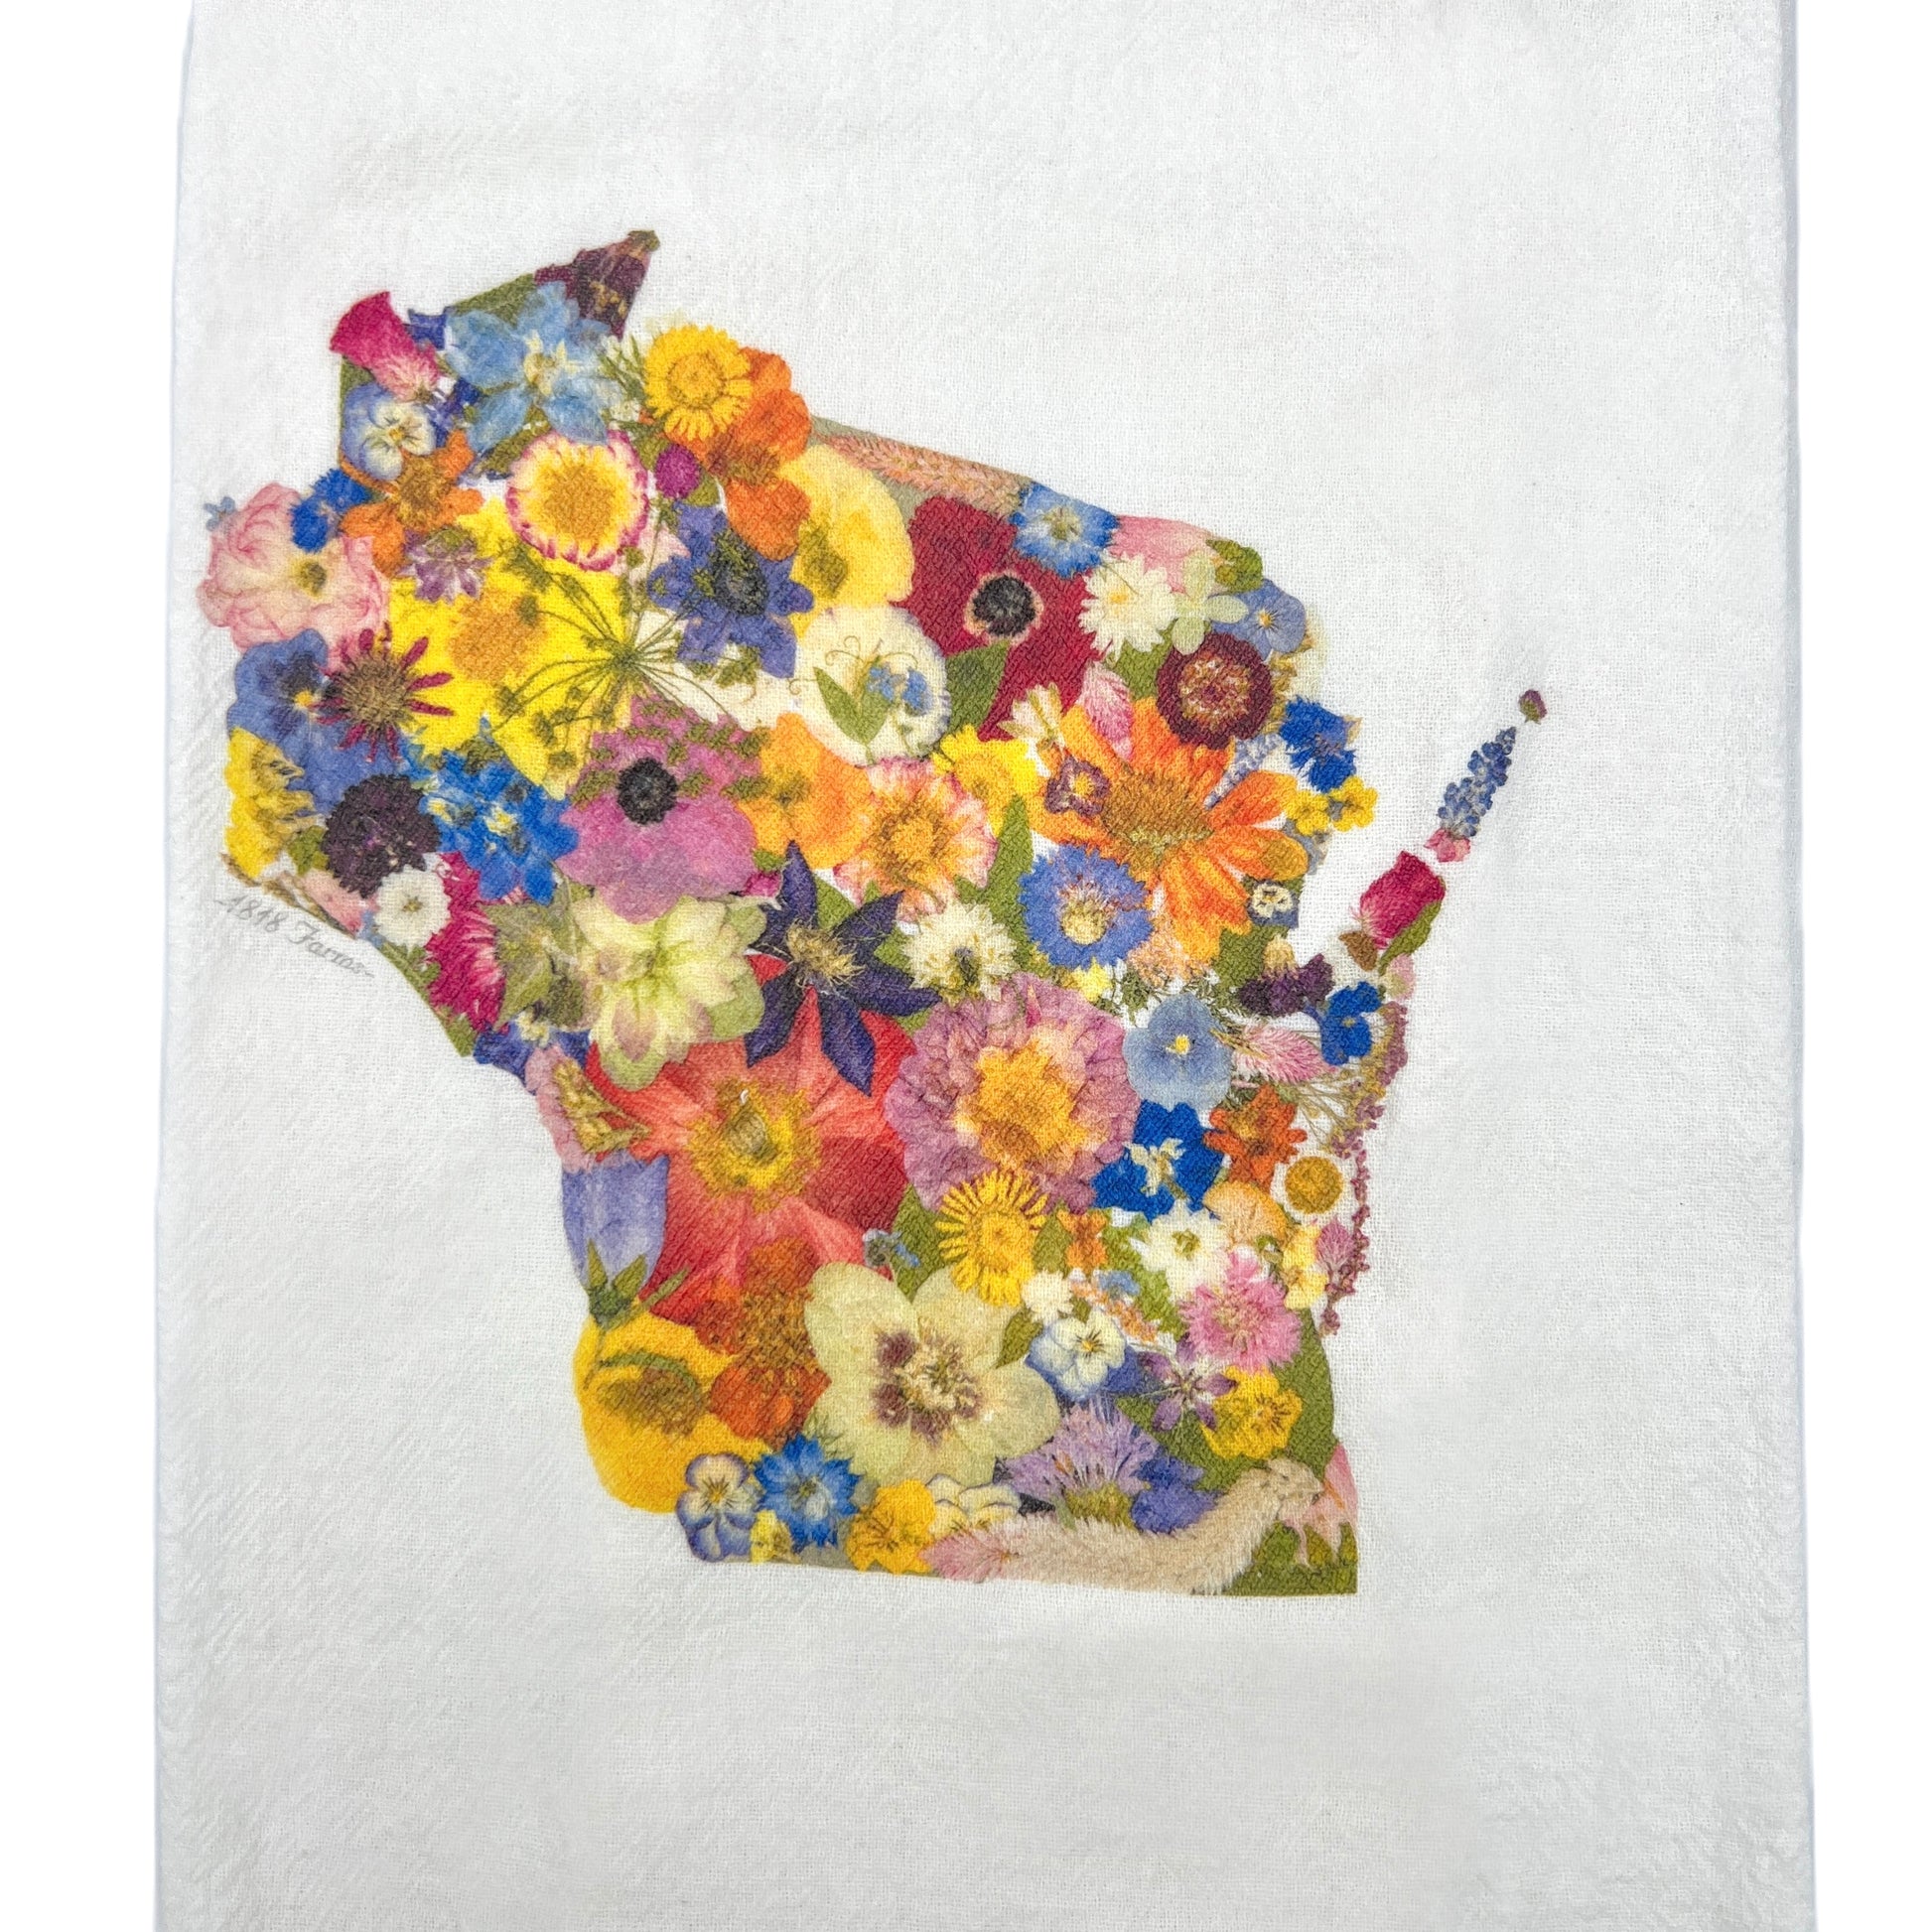 Wisconsin Themed Flour Sack Towel  - "Where I Bloom" Collection Towel 1818 Farms   